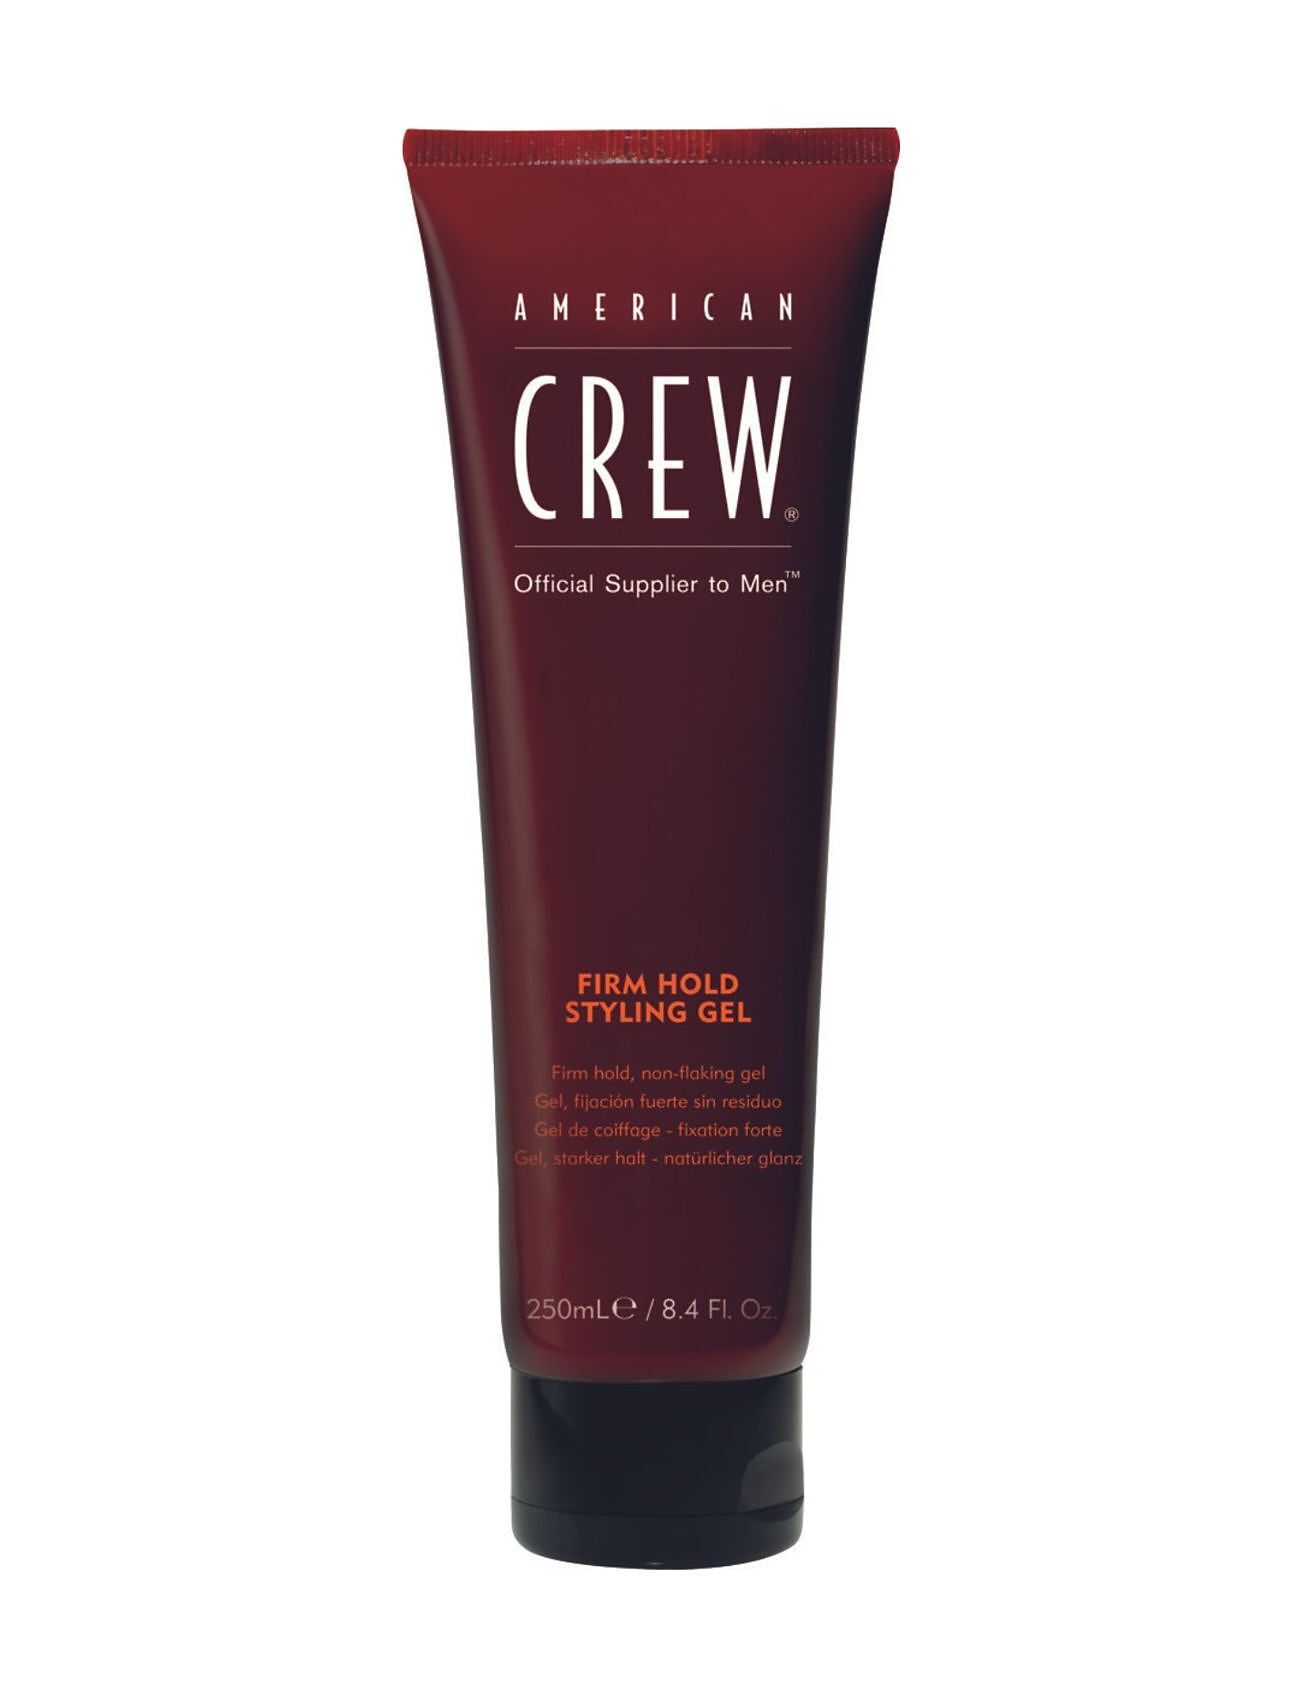 American Crew Classic Styling Firmhold Styling Gel Beauty MEN Hair Styling Gel Nude American Crew